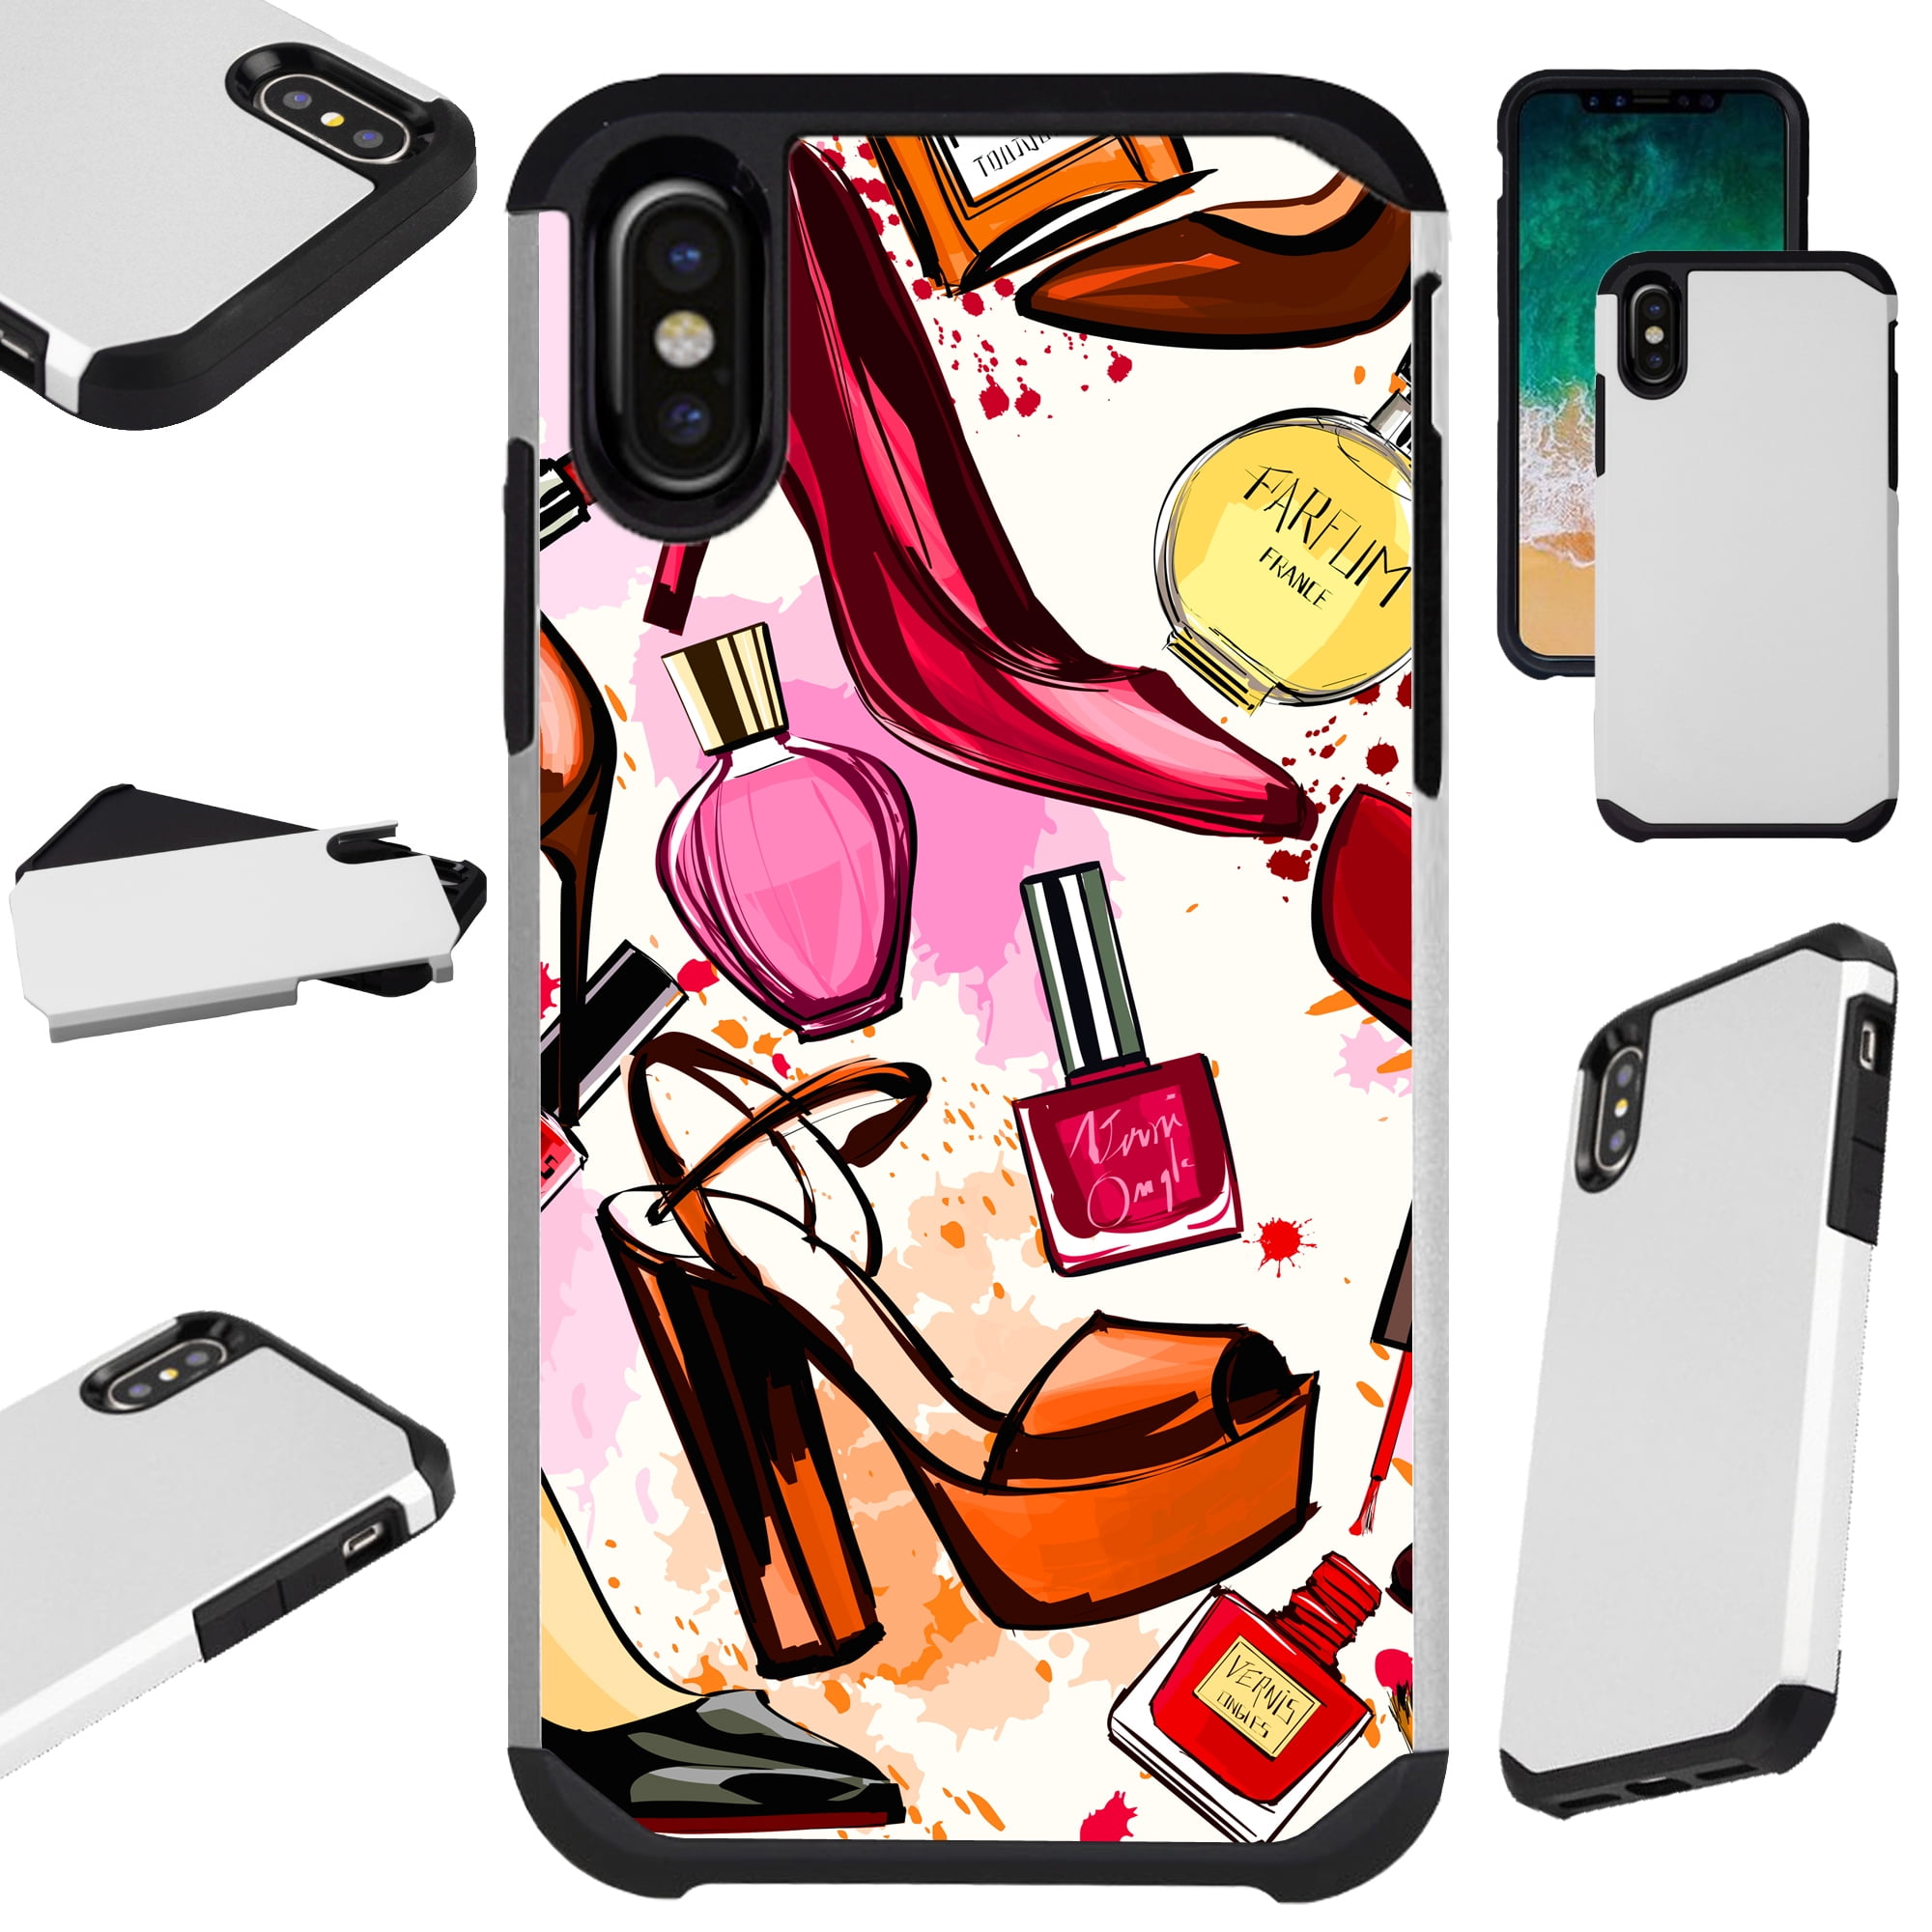 Compatible With Apple Iphone Xr 6 1 Case Hybrid Tpu Fusion Phone Cover Shoes Perfume Walmart Com Walmart Com